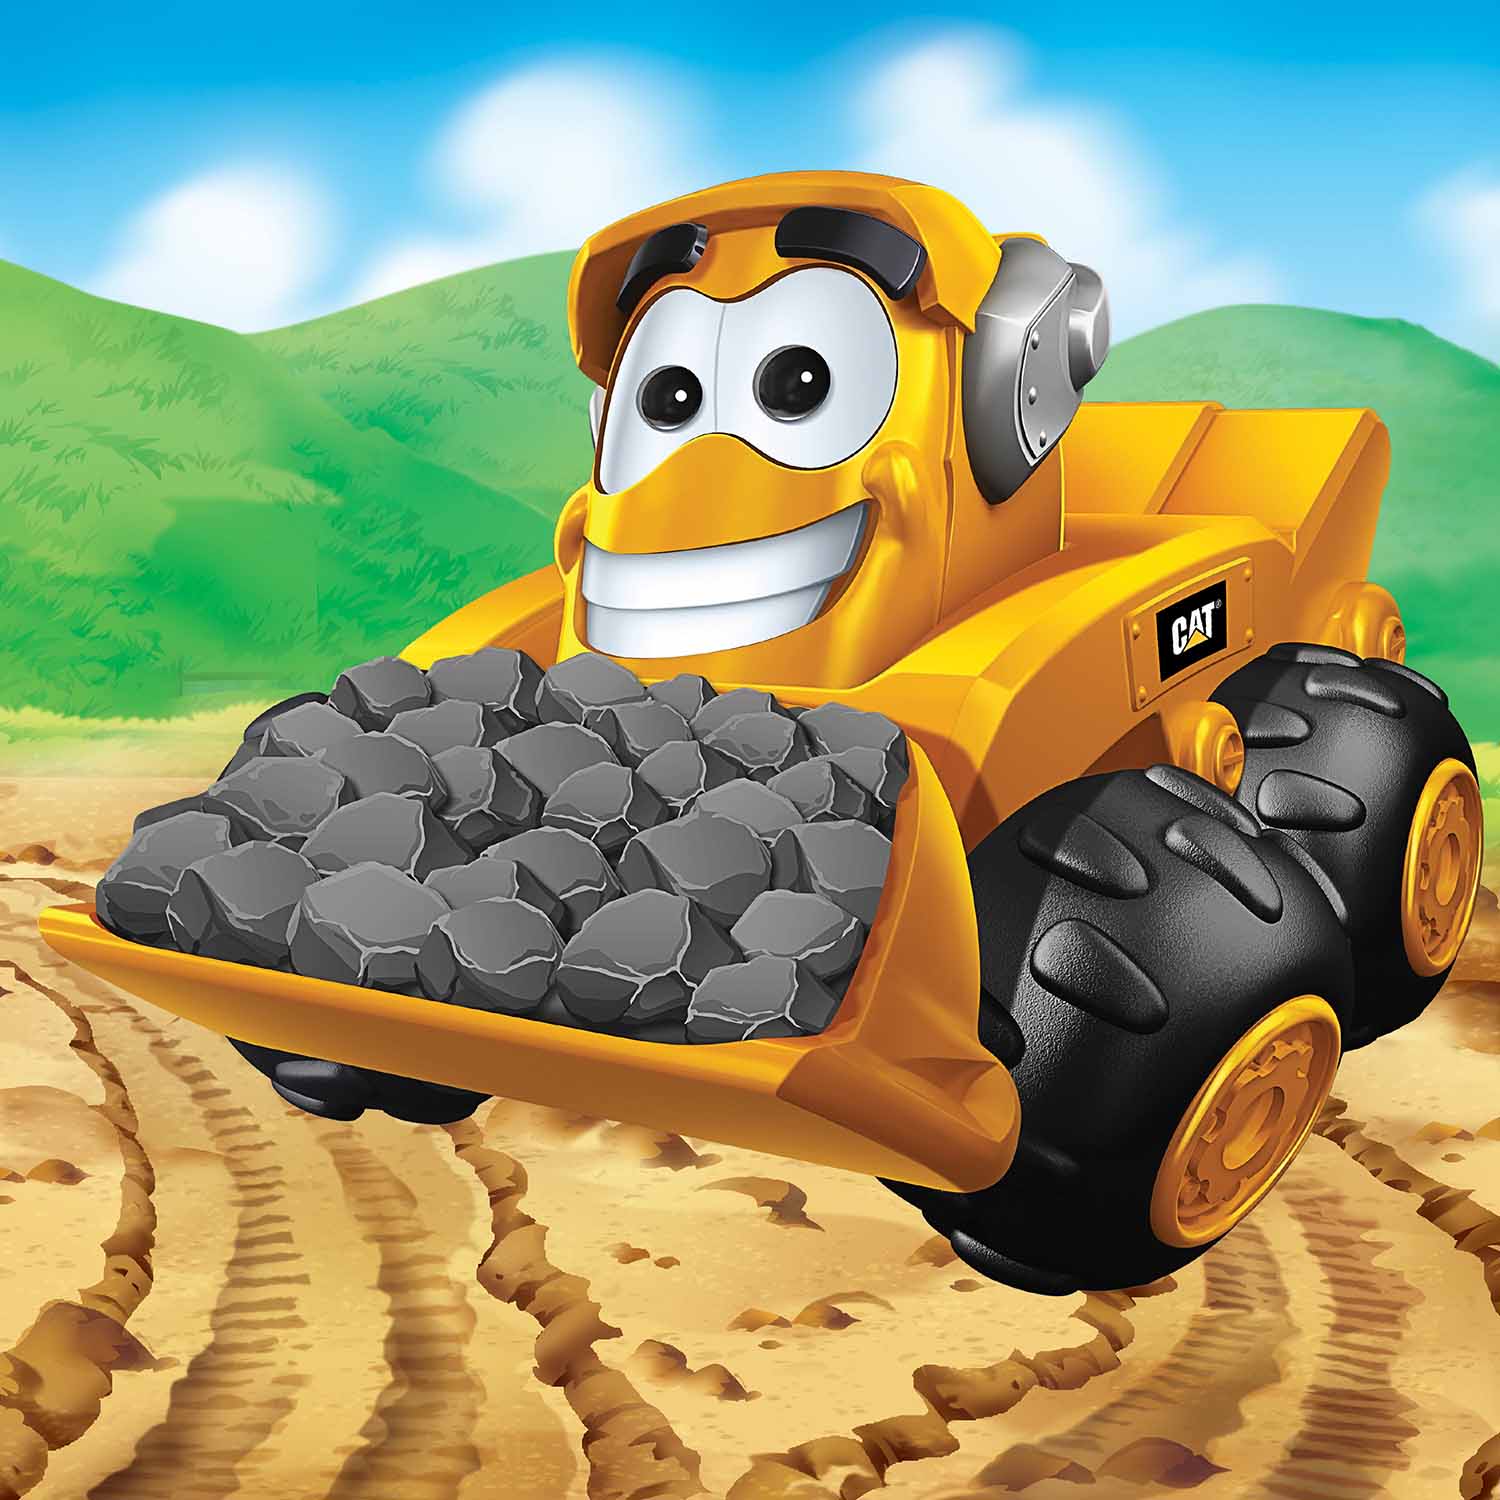 Caterpillar - Mighty Marcus 25 Piece Squzzle Construction Jigsaw Puzzle